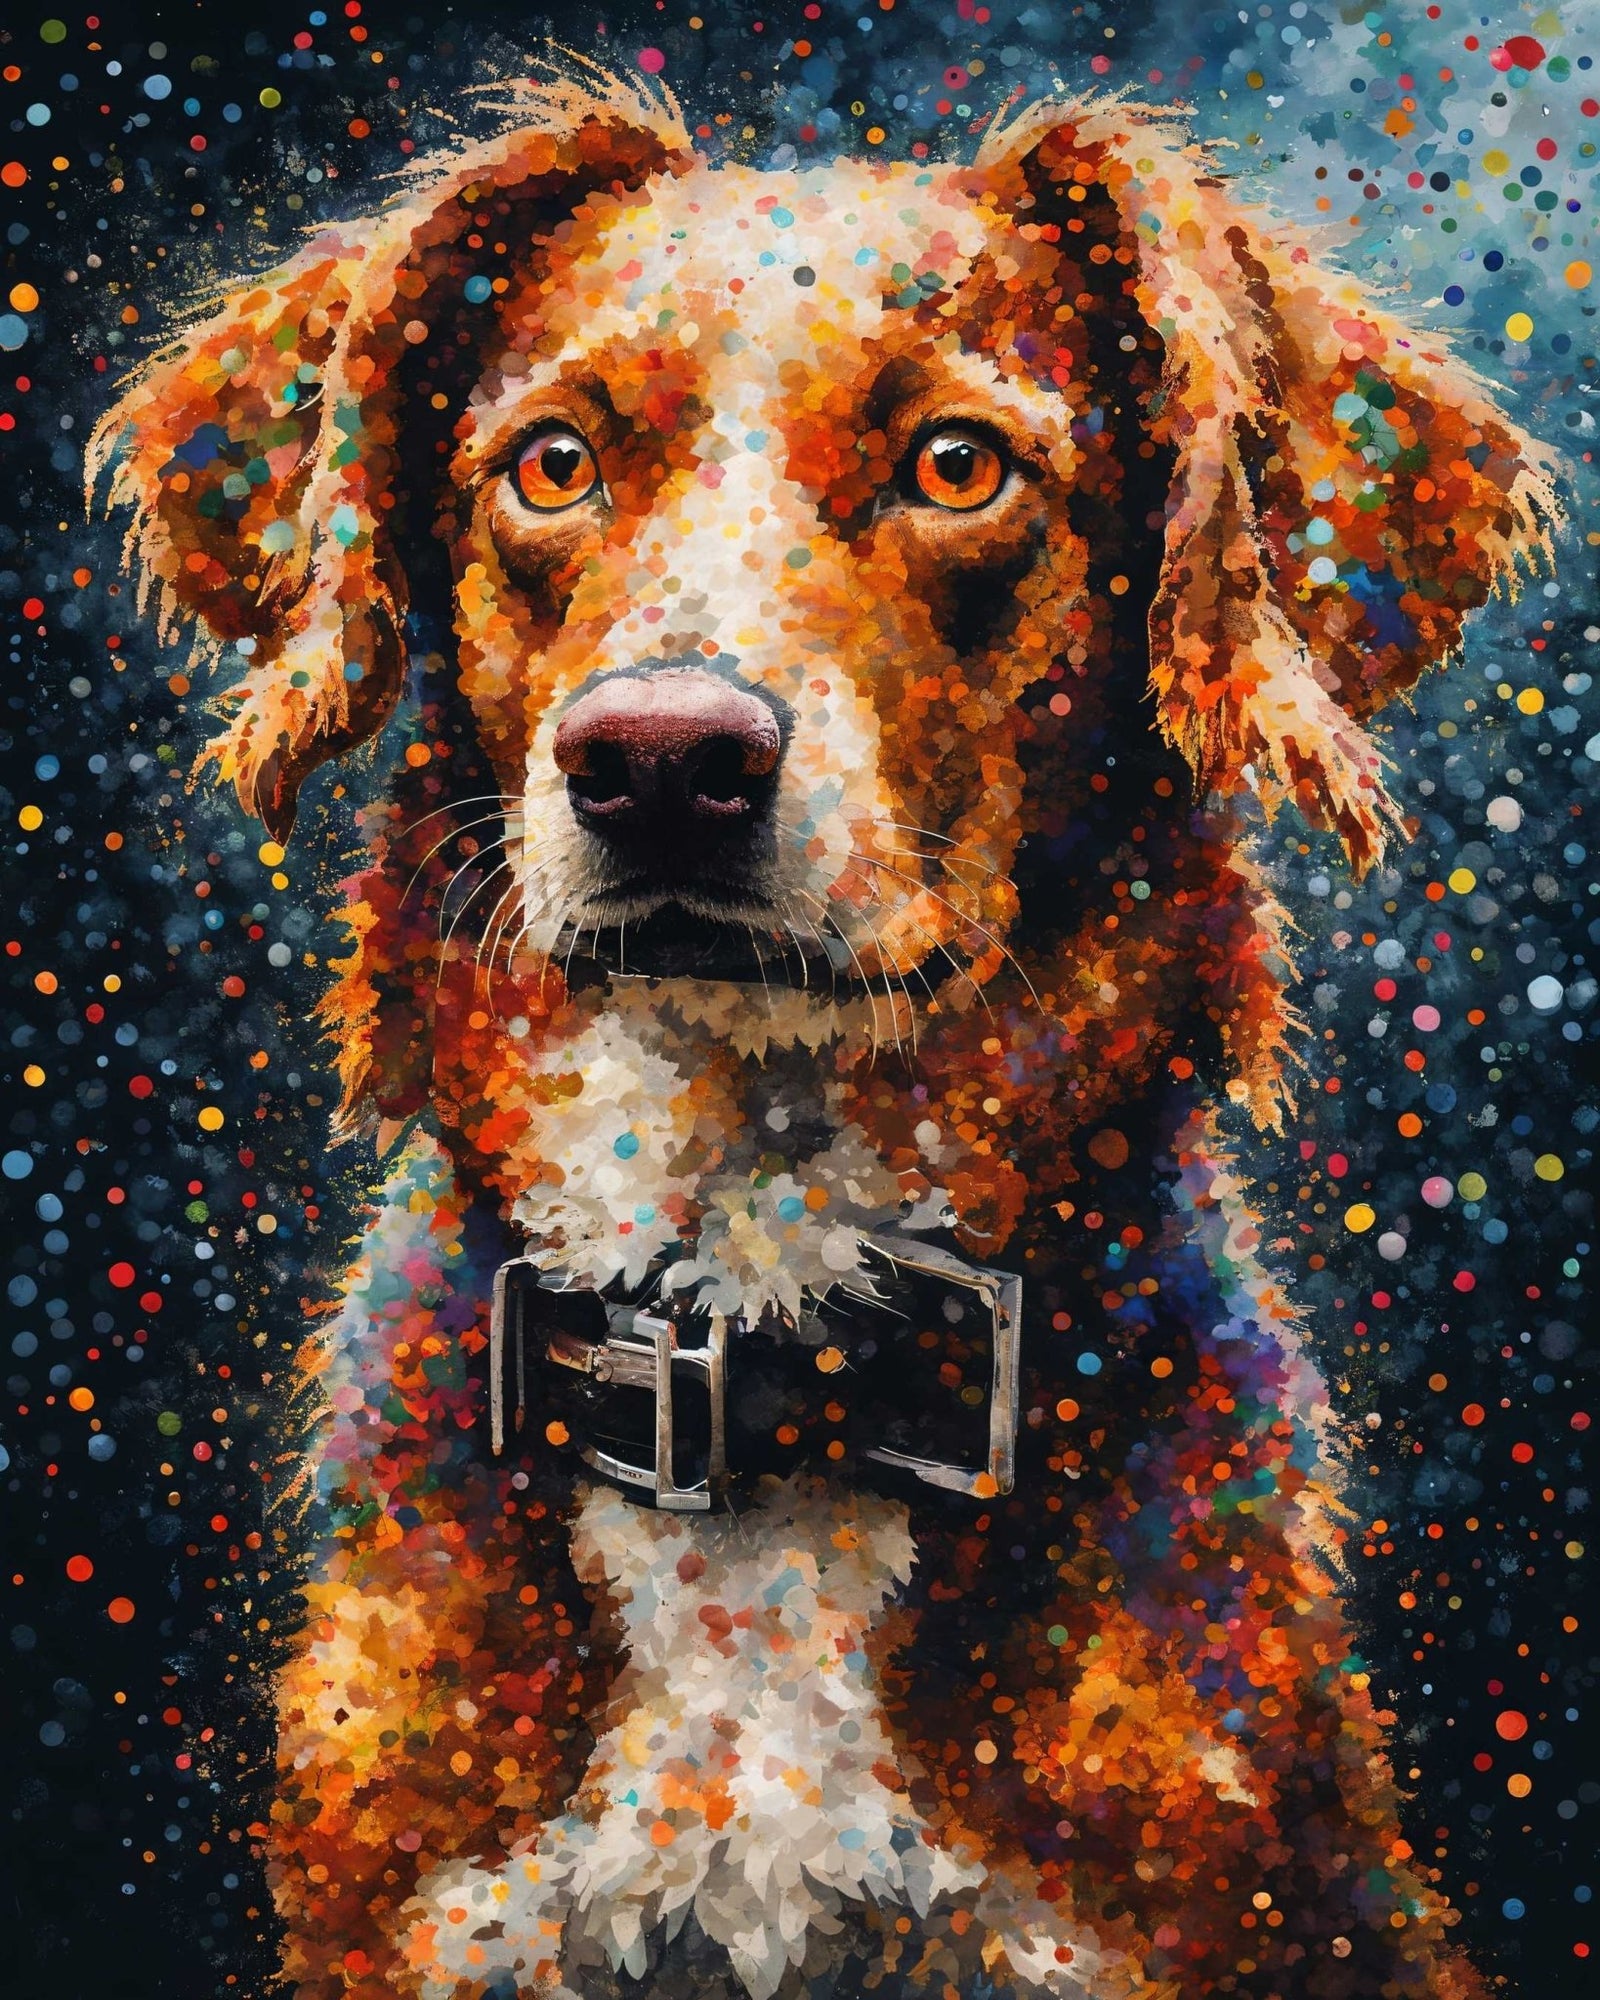 Loyal friend - Poster - Ever colorful